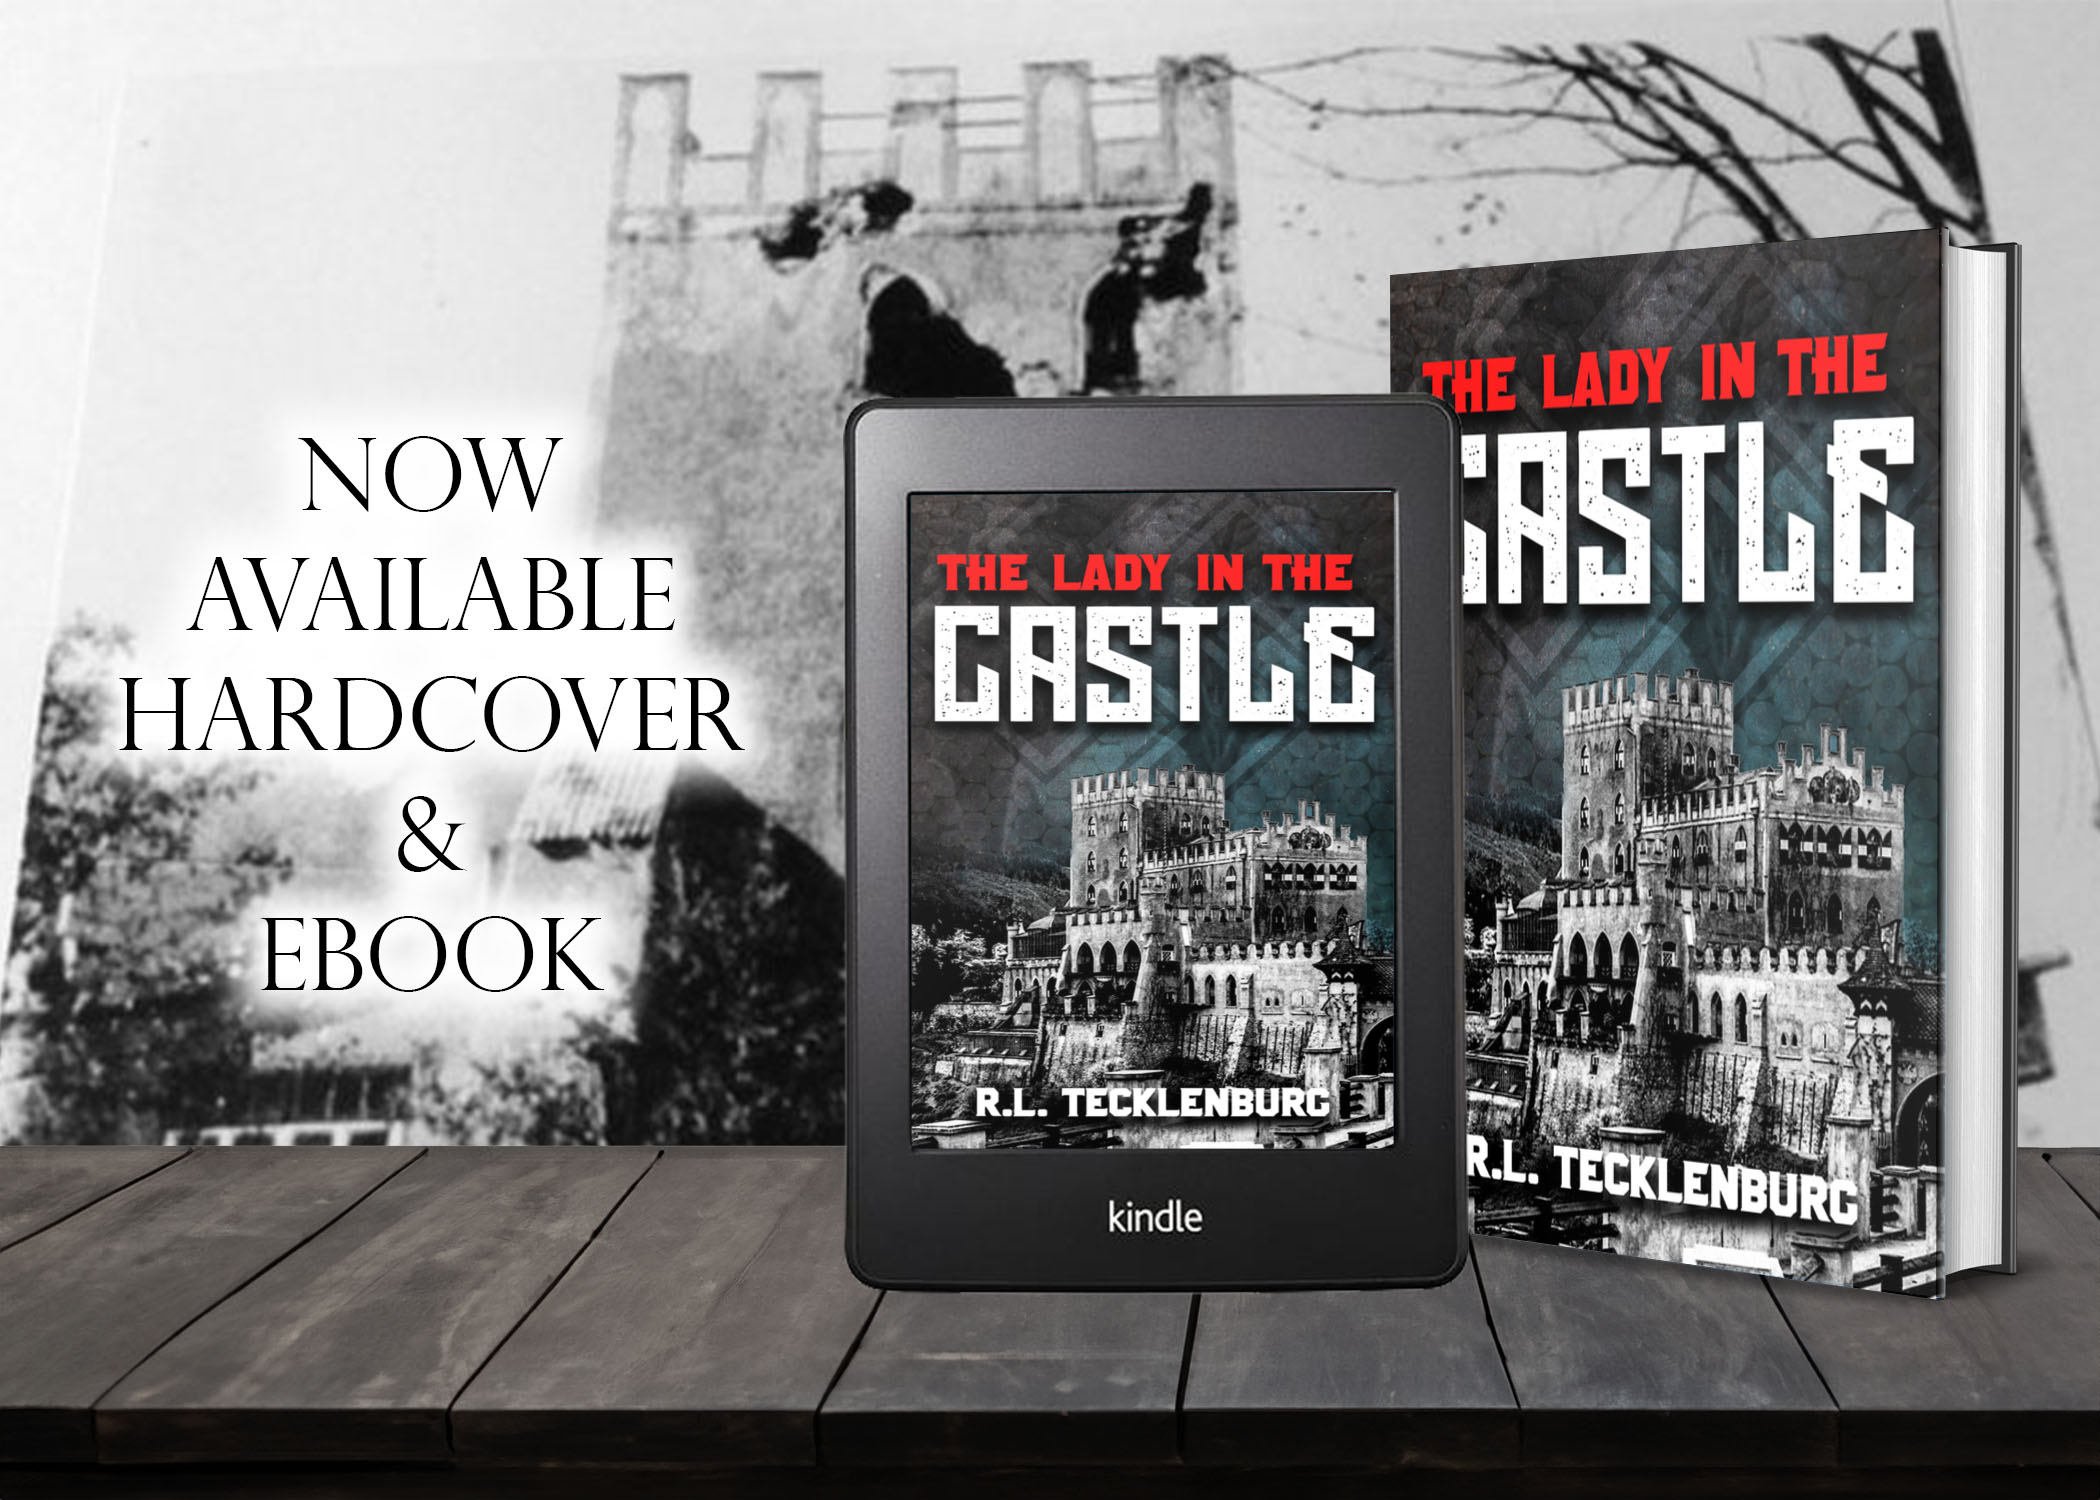 The Lady in the Castle by Robert Tecklenburg,  now available from Histria Books